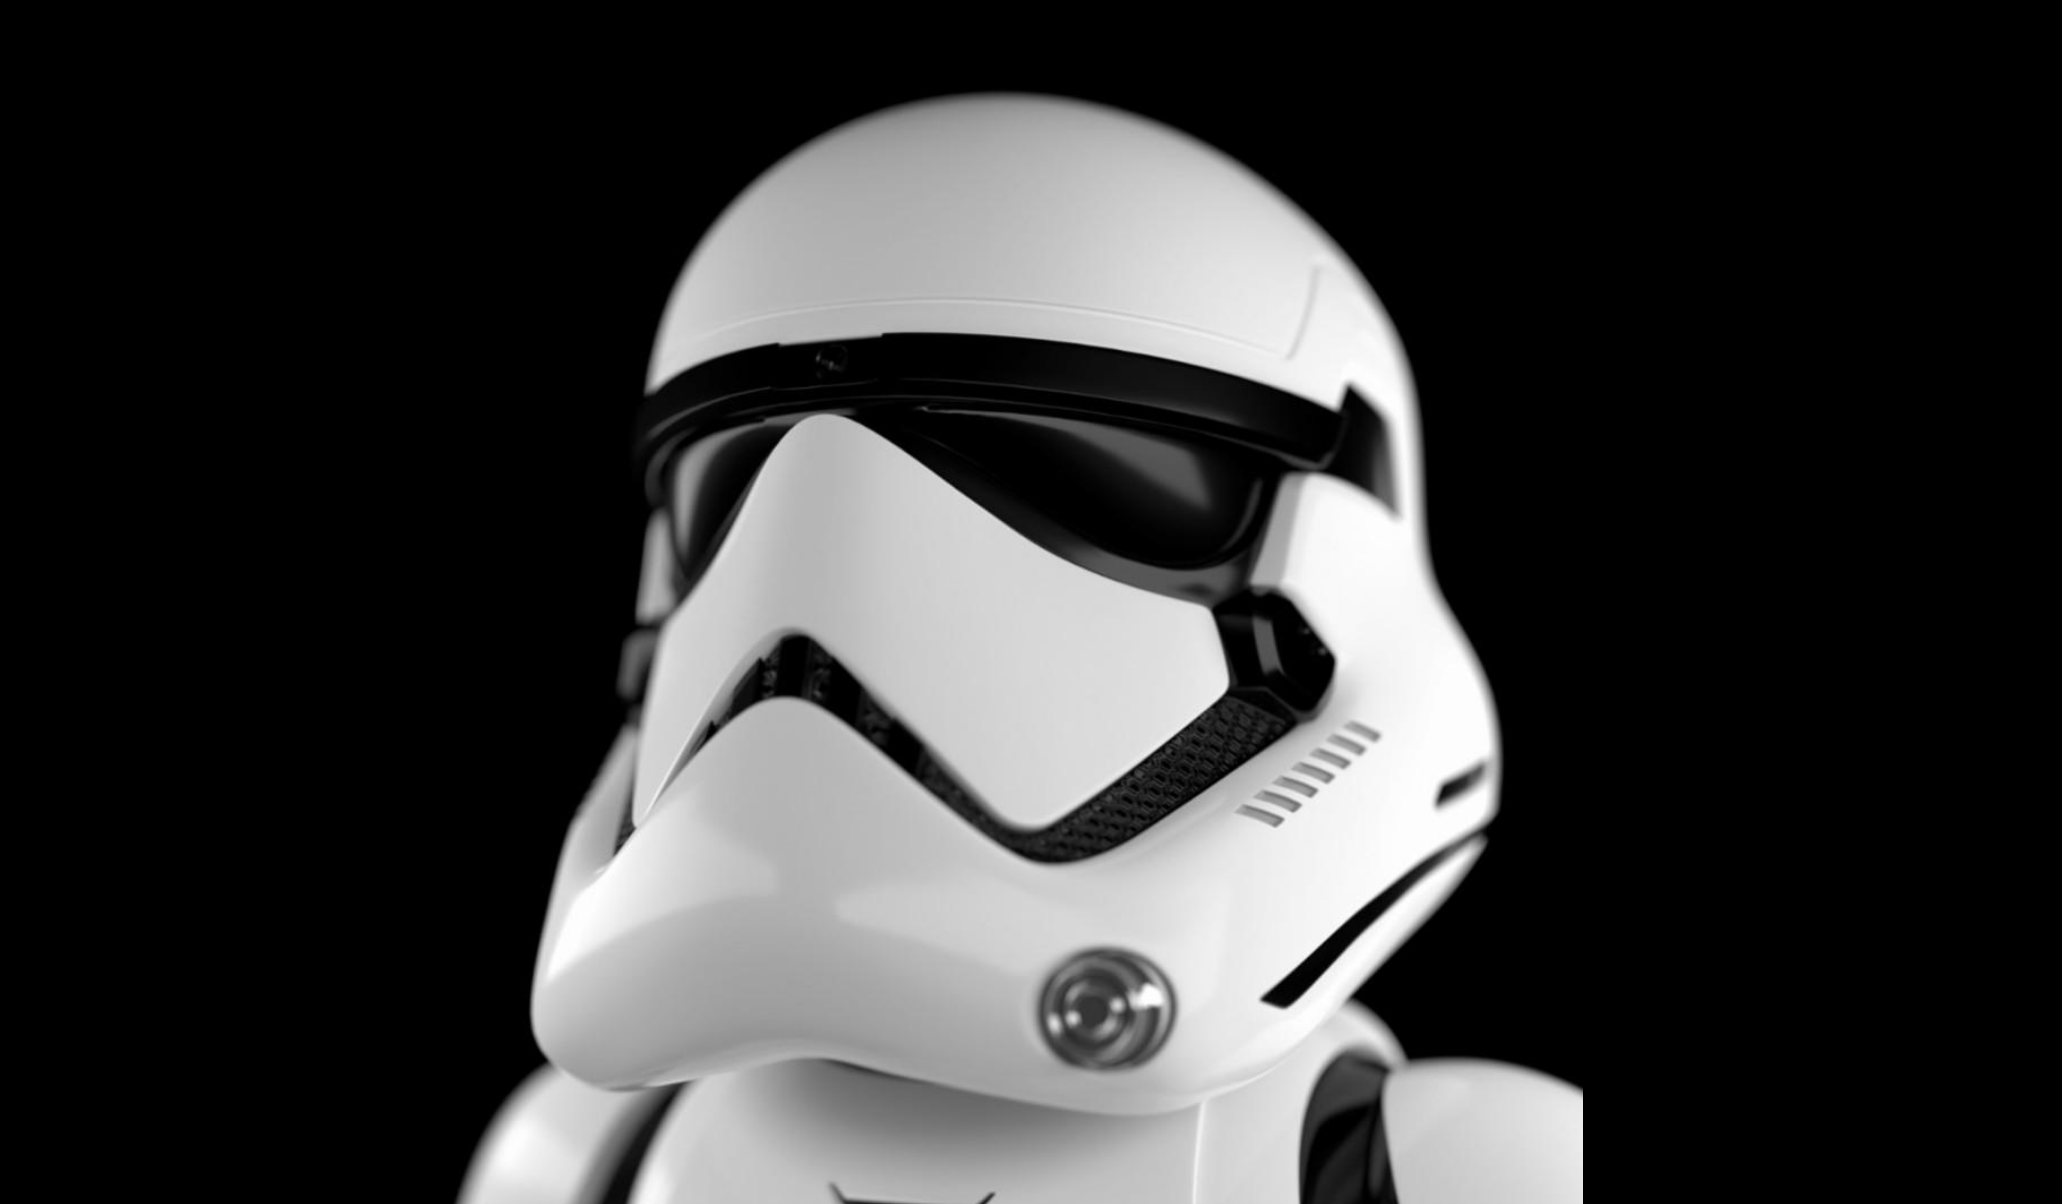 UBTech’s latest product is the US$300 Star Wars First Order Stormtrooper Robot – created in partnership with Disney. Photo: Handout